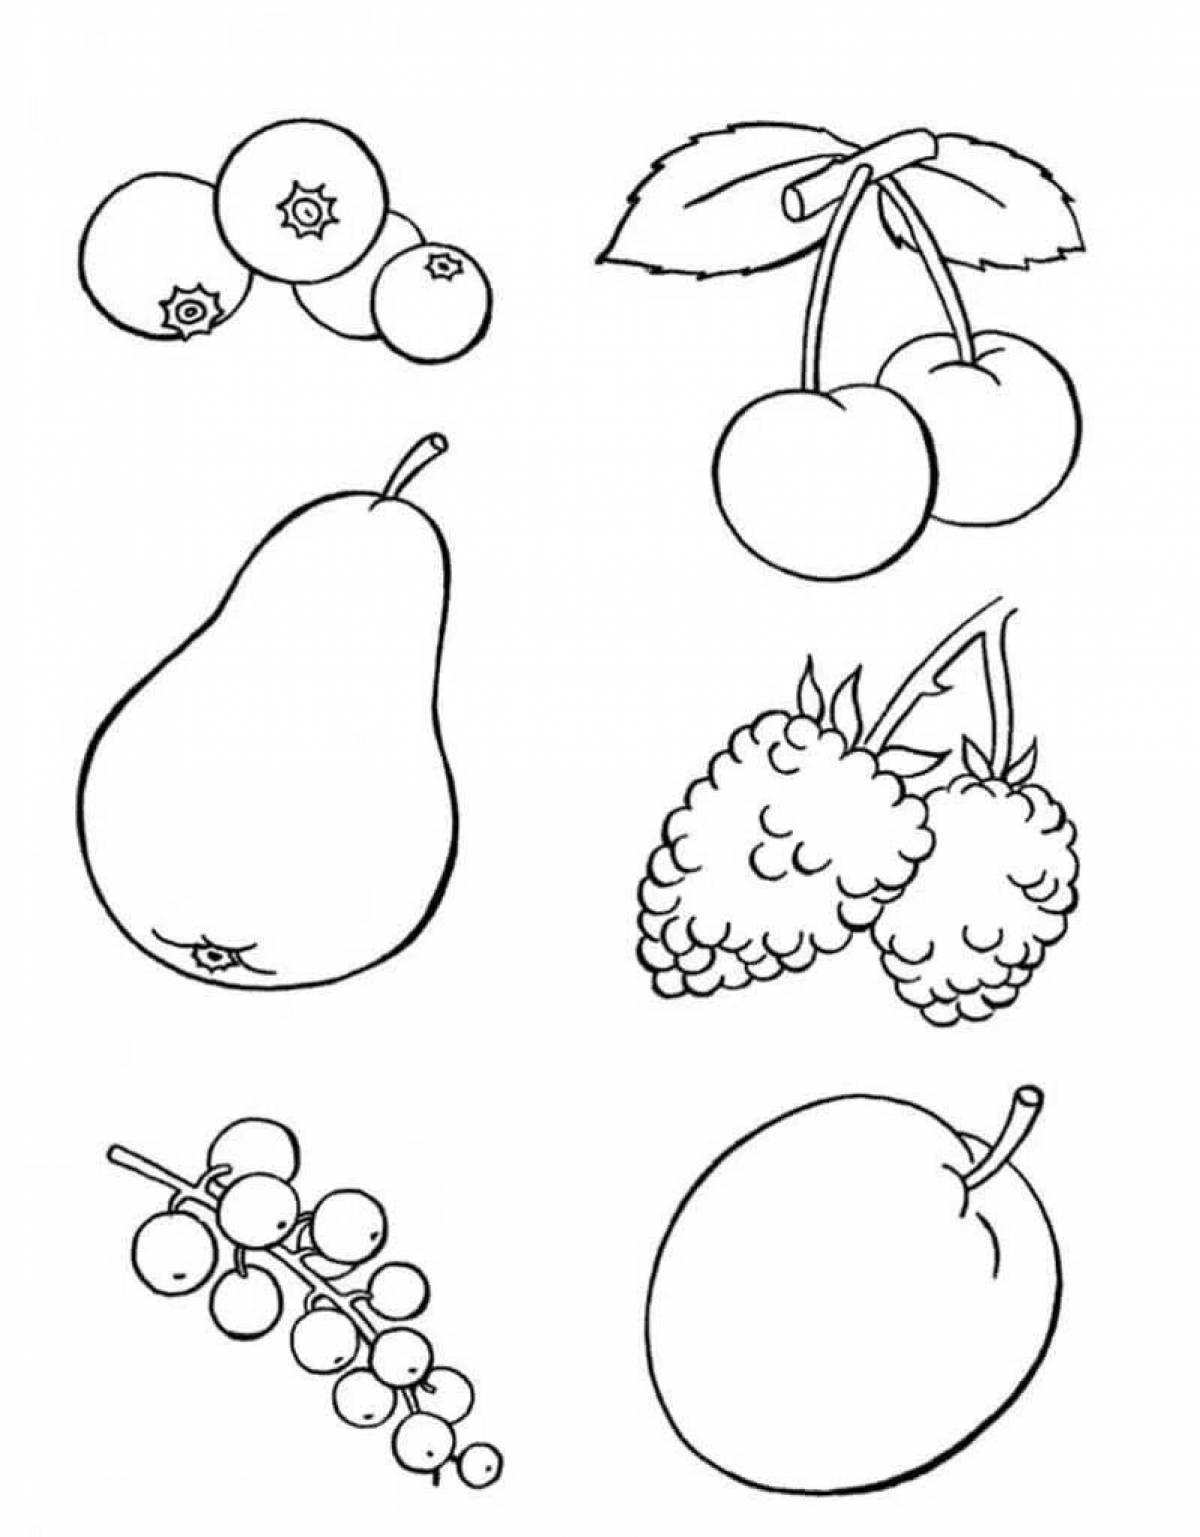 Awesome fruit coloring pages for girls